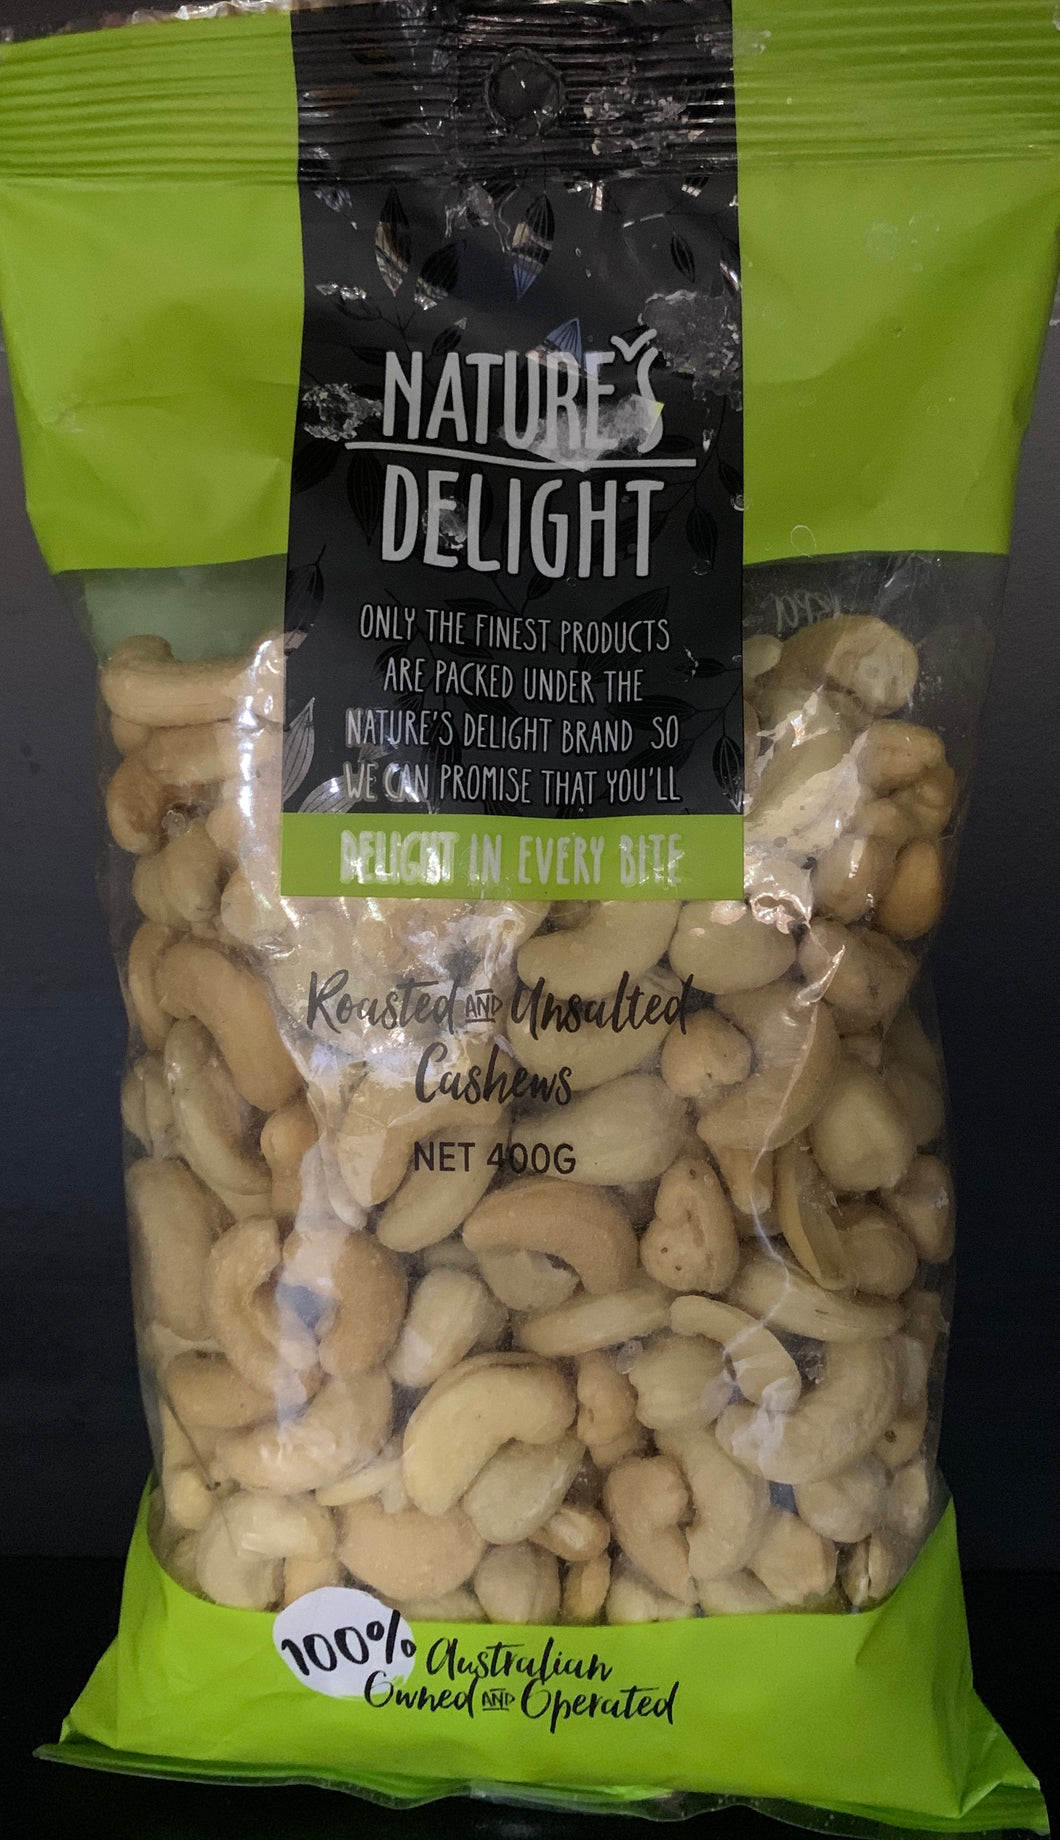 Nuts Cashews Roasted and Unsalted